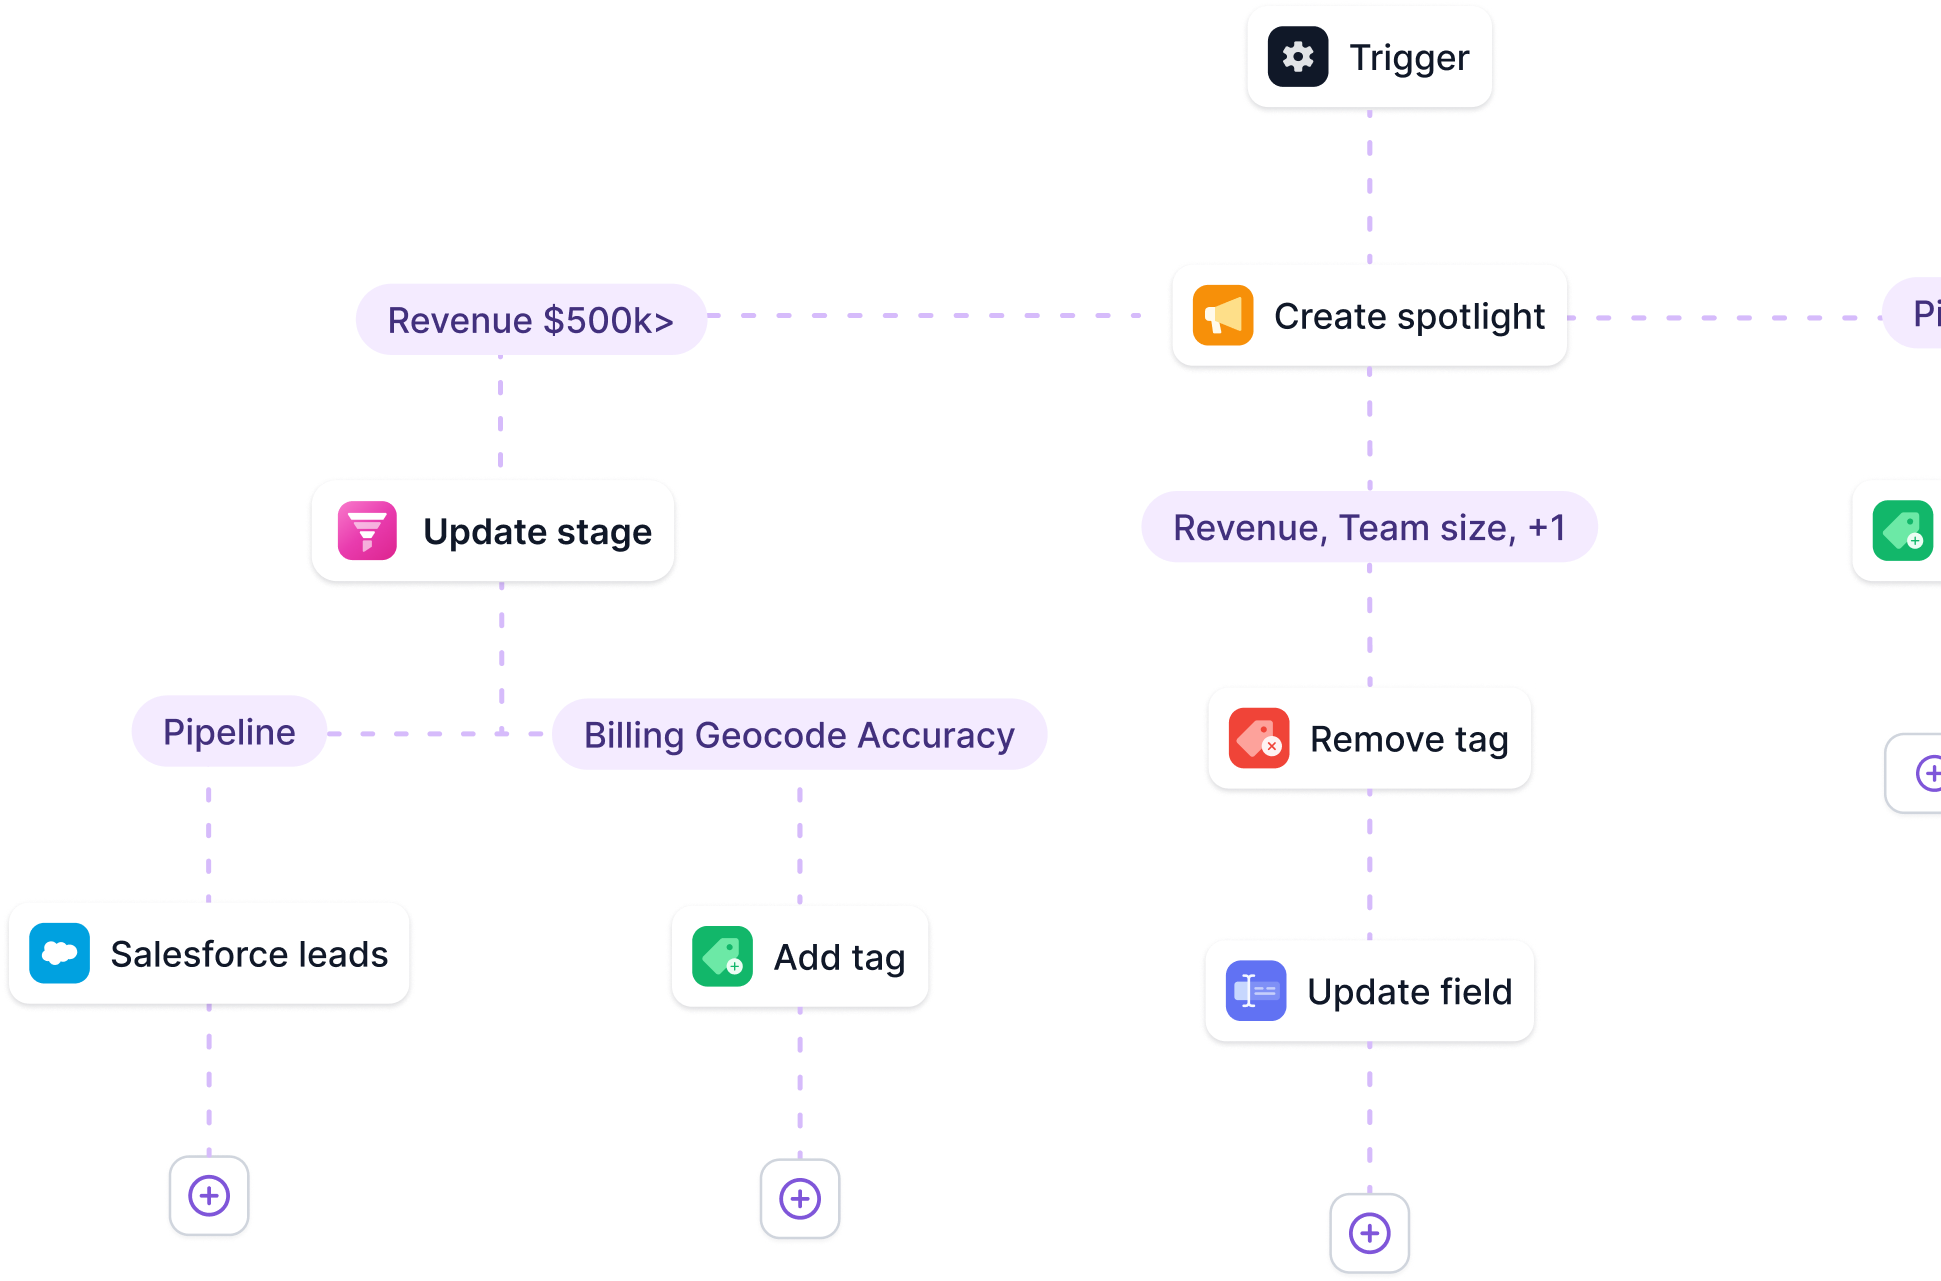 Workflow automation